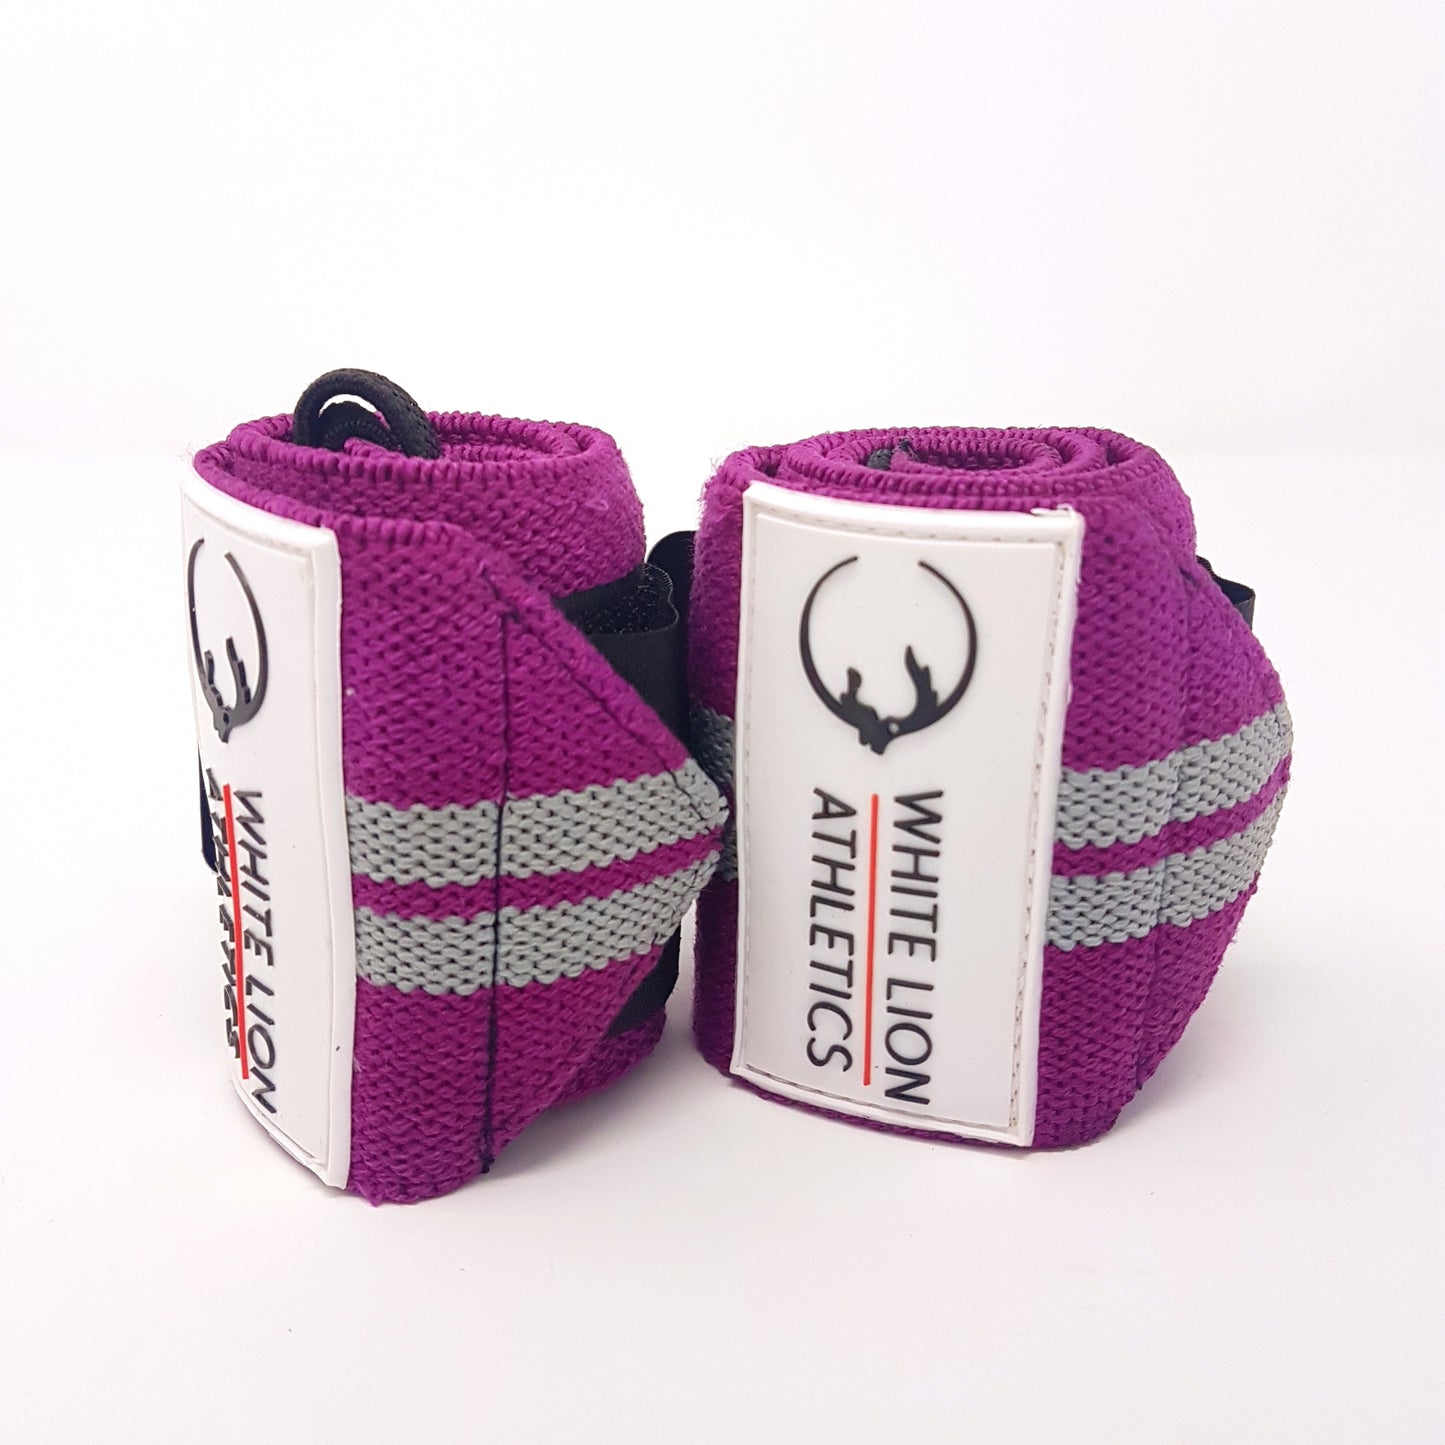 Wrist Wraps| Purple with Grey Stripes| Wrist Support for Weightlifting & Crossfit - White Lion Athletics